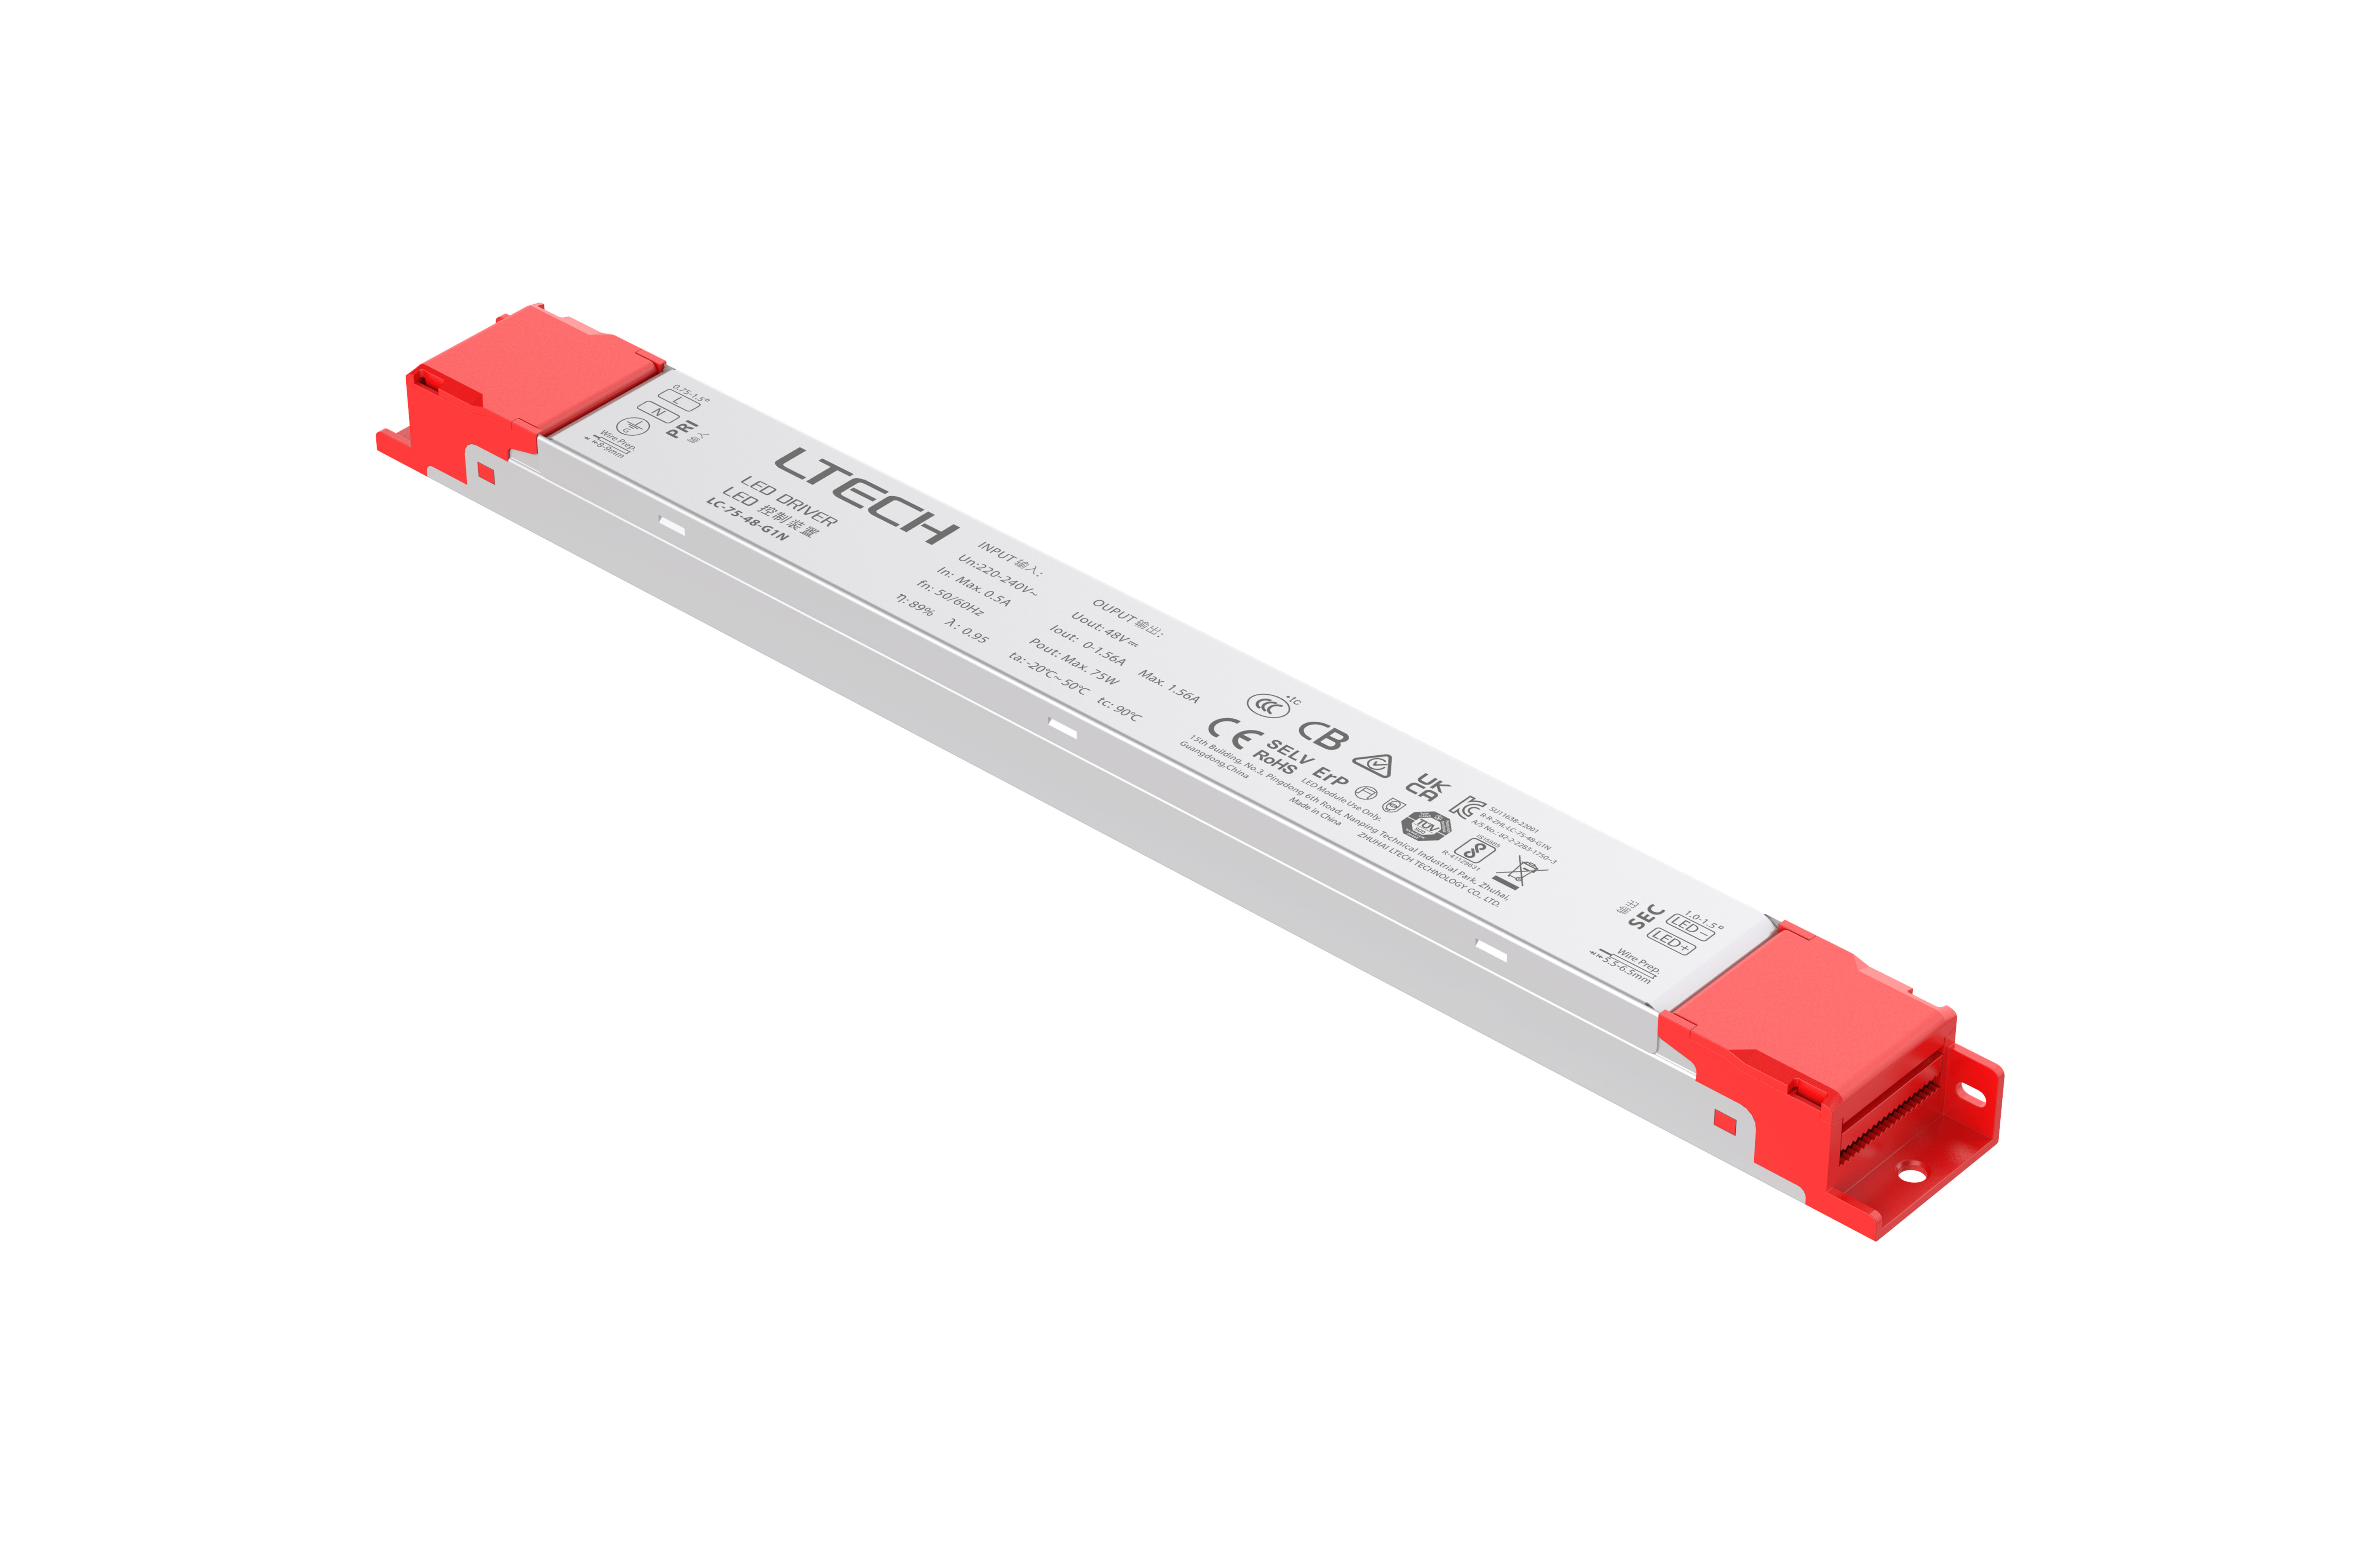 LC-75-48-G1N  Intelligent Constant Voltage  LED Driver, ON/OFF, 75W, 48VDC 1.56A , 220-240Vac, IP20, 5yrs Warrenty.